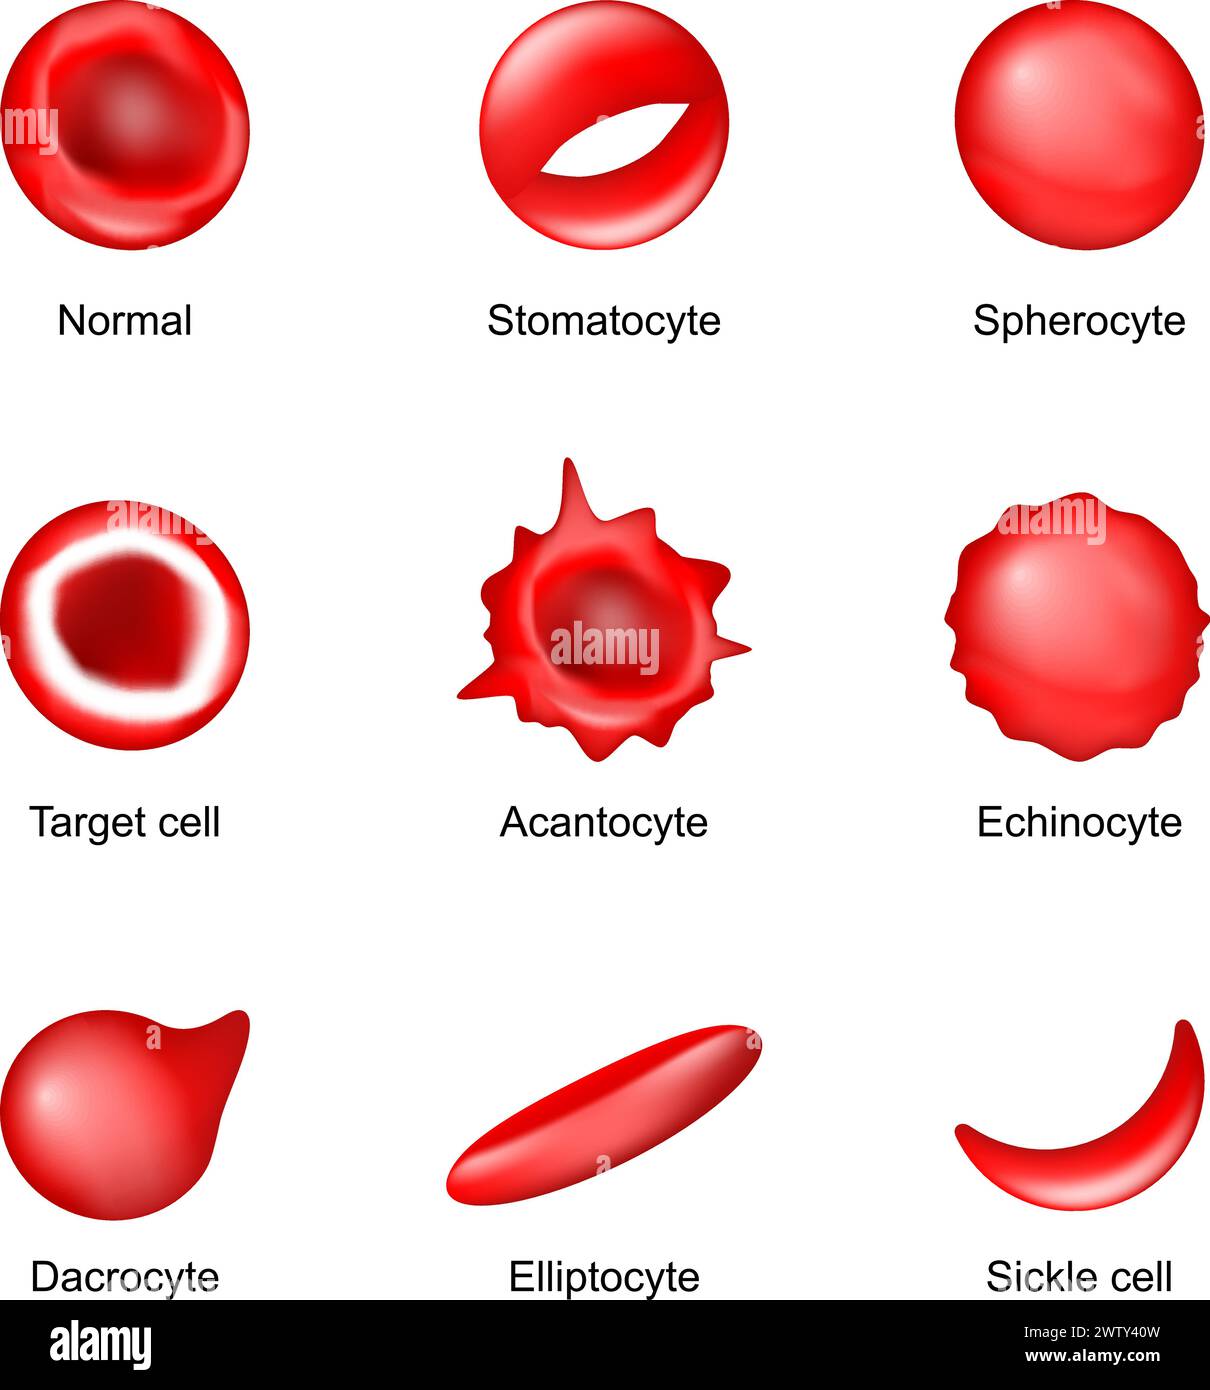 Shape of red blood cell. Sickle cell, Echinocyte, Spherocyte, Elliptocyte, Acantocyte, Stomatocyte, Dacrocyte, Target cell and Normal Erythrocyte. Poi Stock Vector